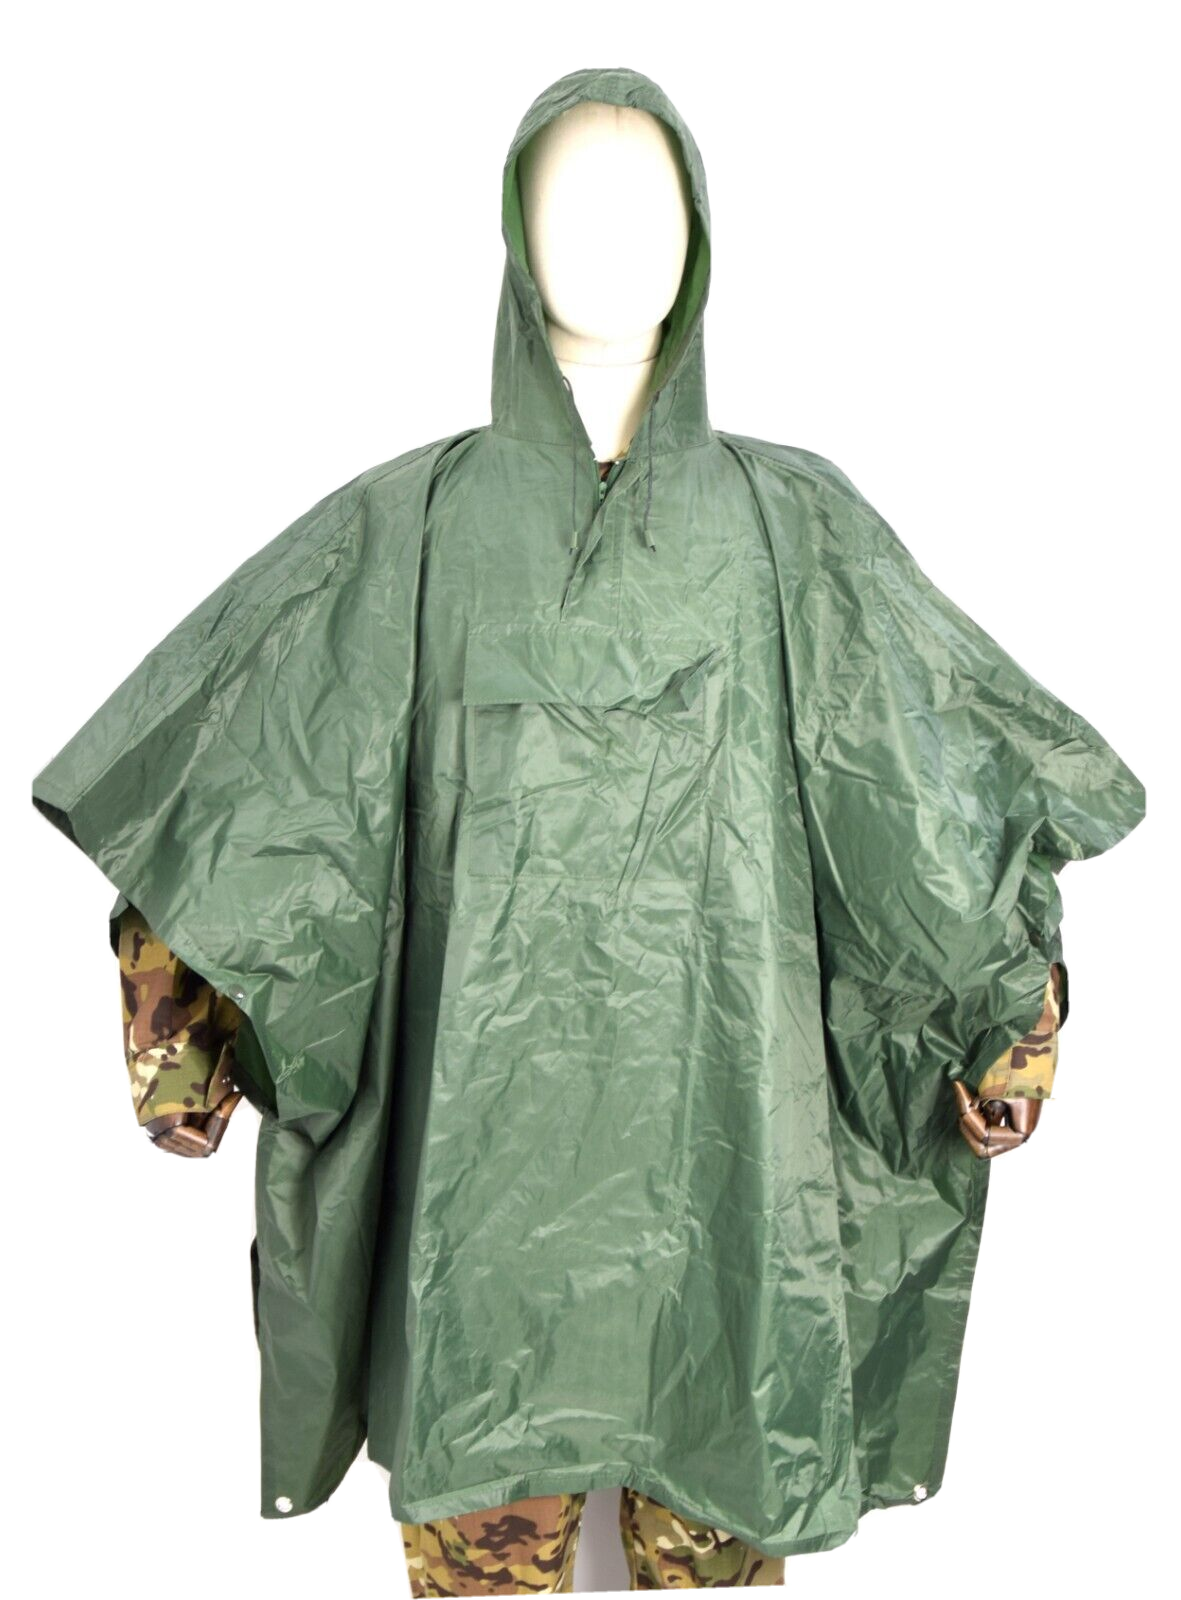 British Army Style Waterproof Poncho Cape Emergency Shelter Sheet With Hood OD